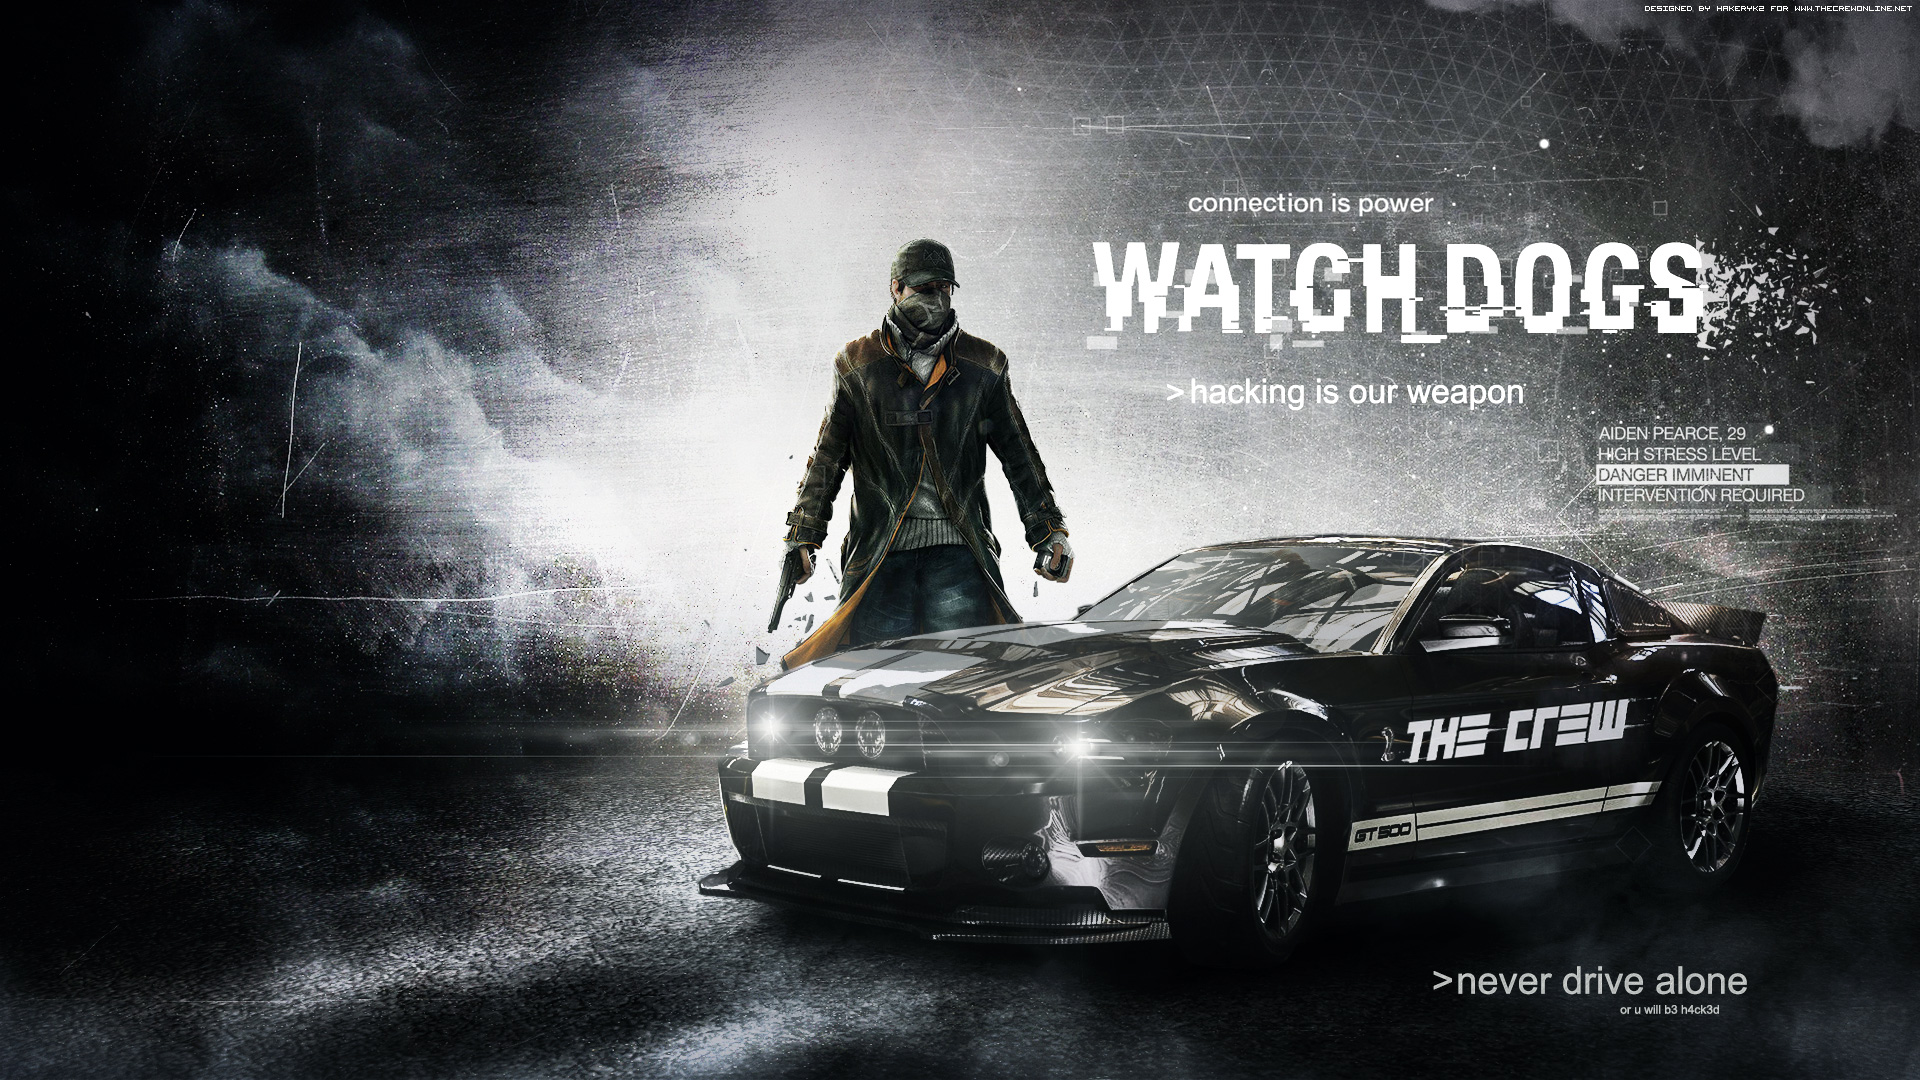 Free Download Watch Dogs Wallpaper Hd 1080p Image Gallery 19x1080 For Your Desktop Mobile Tablet Explore 47 Watch Dogs Wallpaper 1080p Cool 3d Wallpaper Hd Dogs Watch Dogs Wallpaper